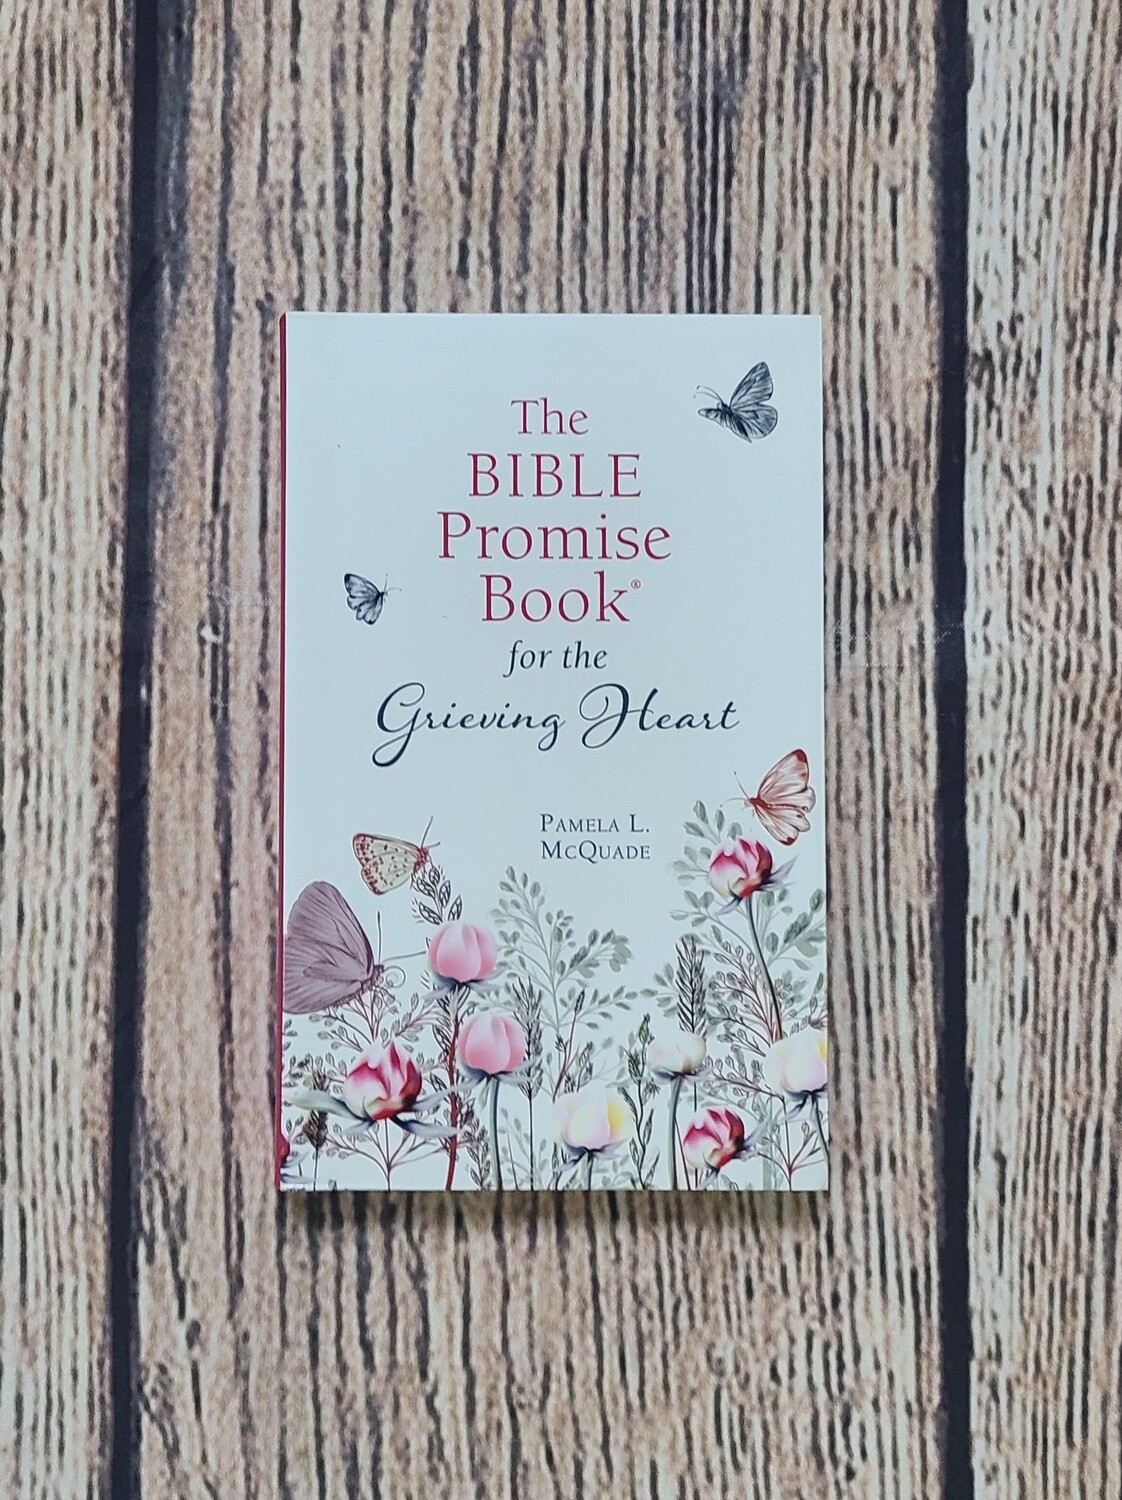 The Bible Promise Book for the Grieving Heart by Pamela McQuade - Paperback - New